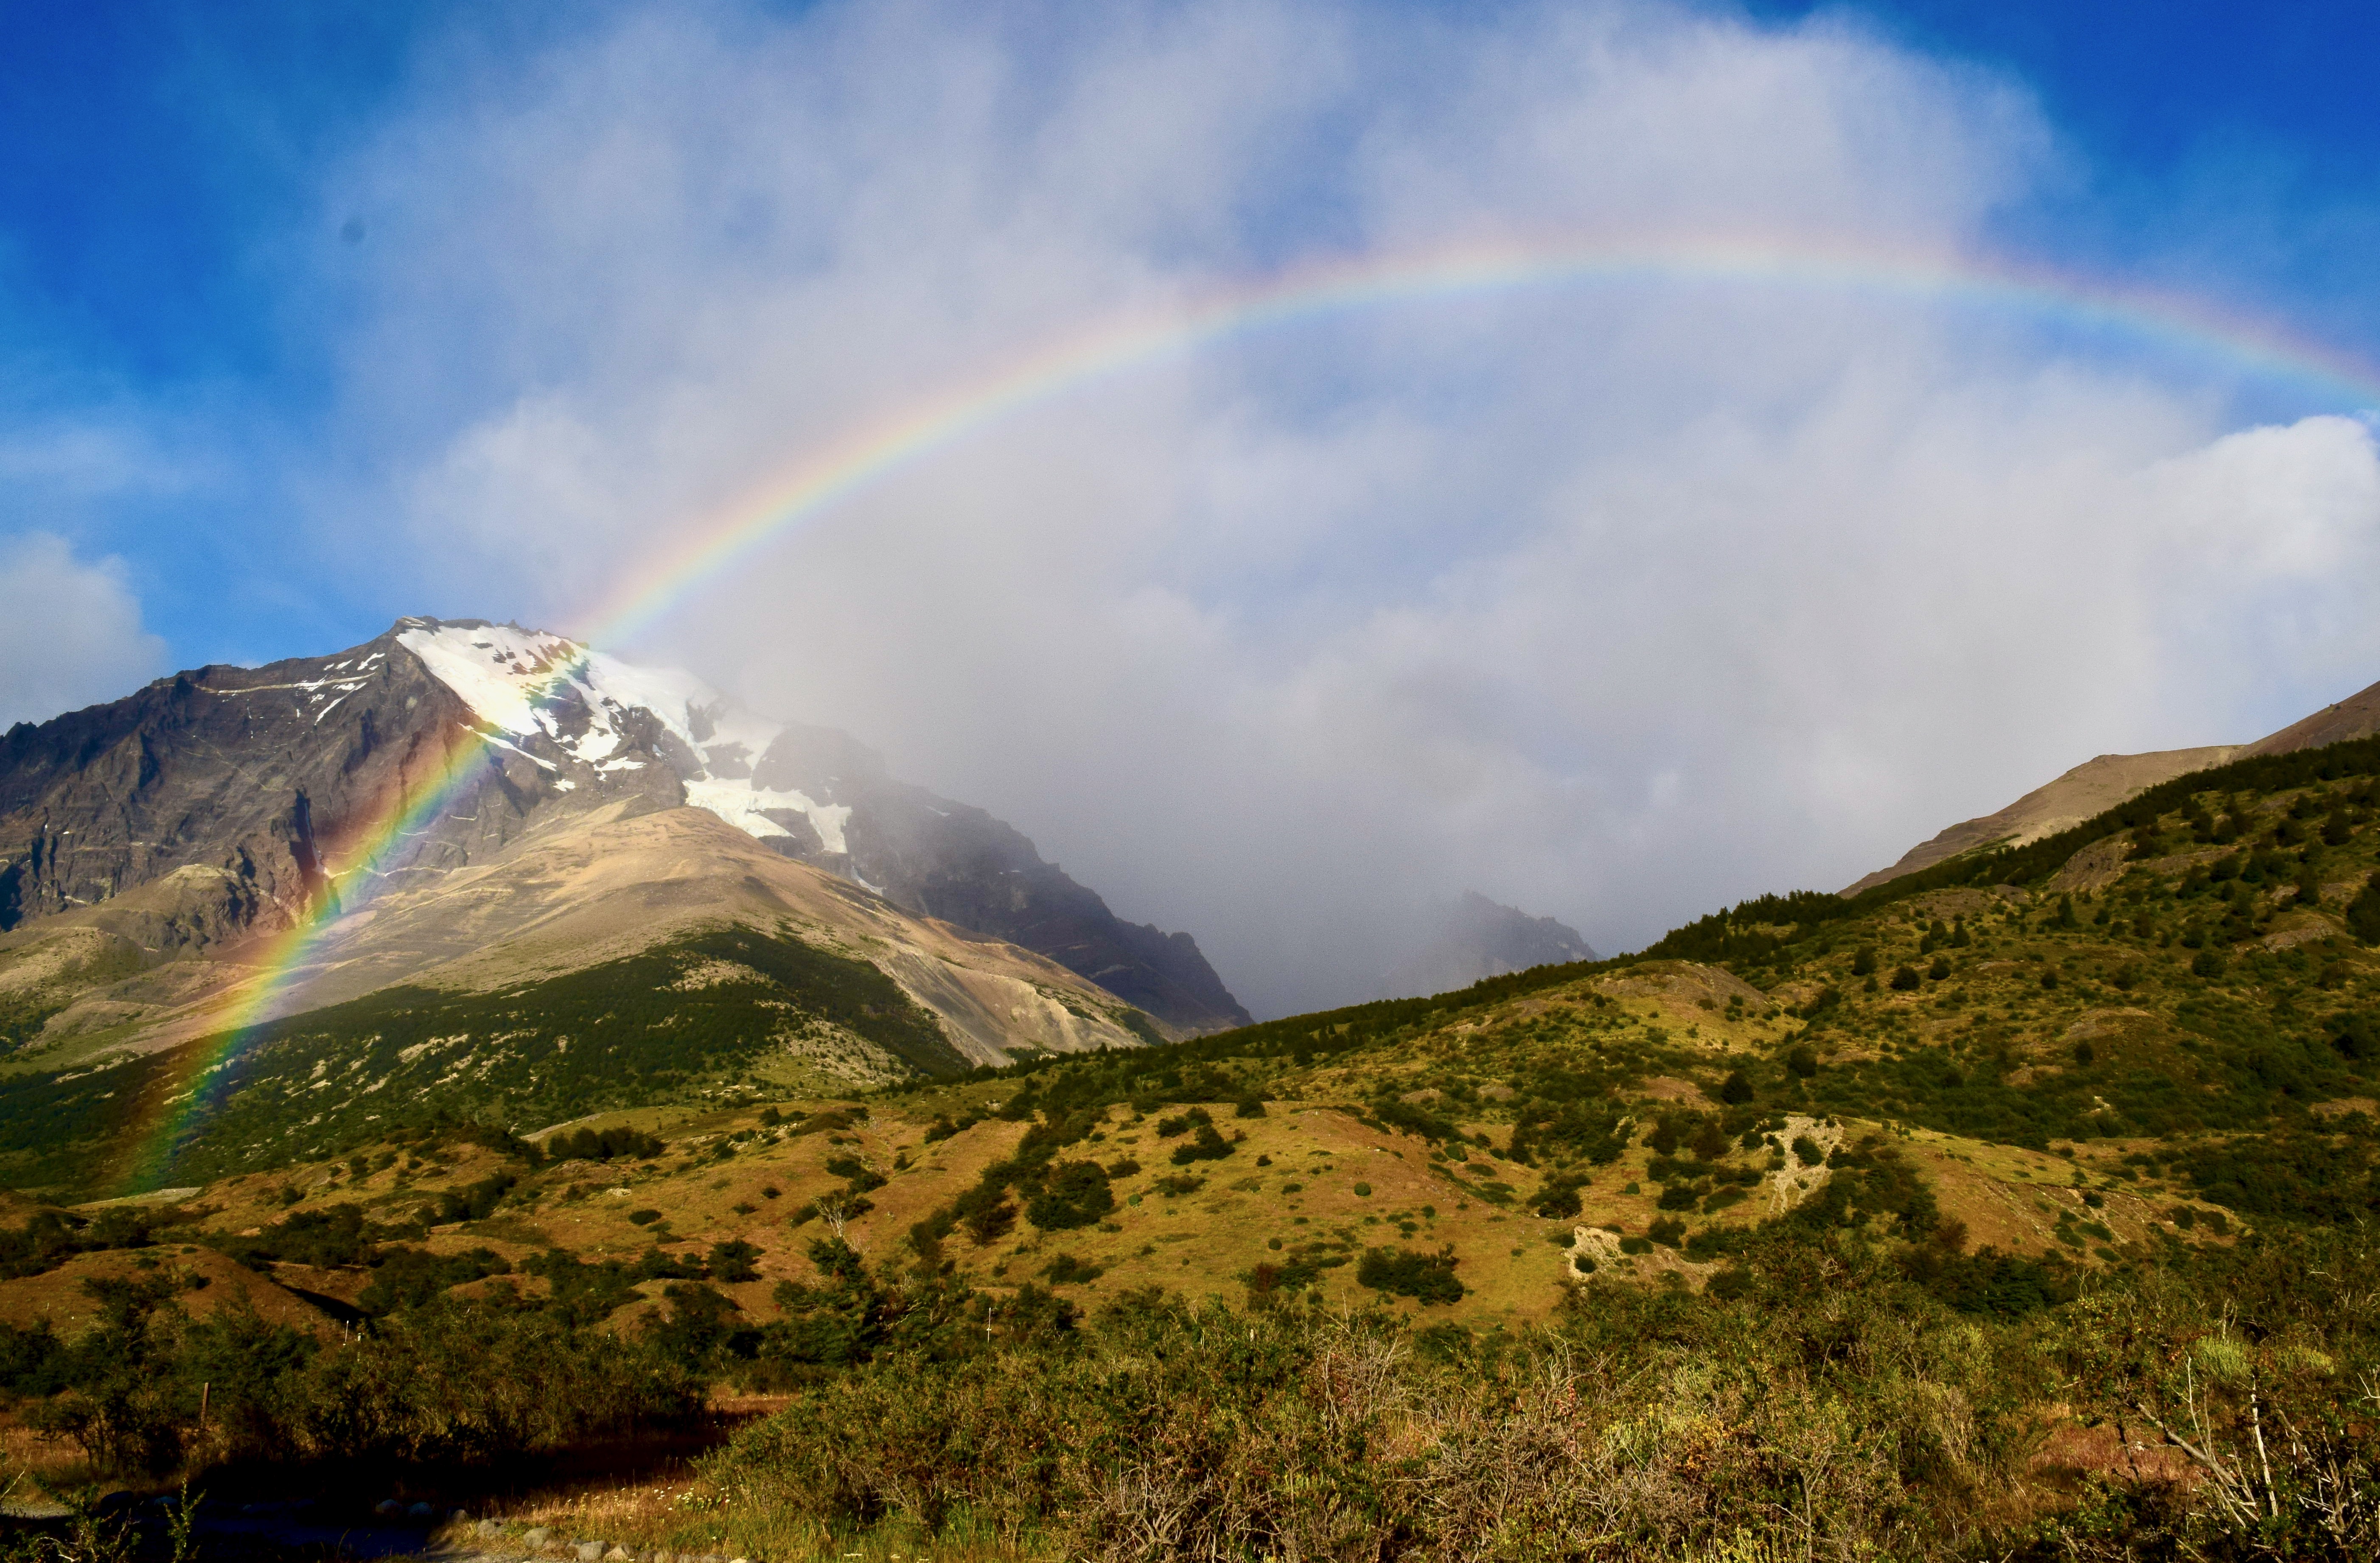 Snow-covered mountains against a blue, somewhat clear and somewhat cloudy sky with a rainbow above the valley of scrub plants